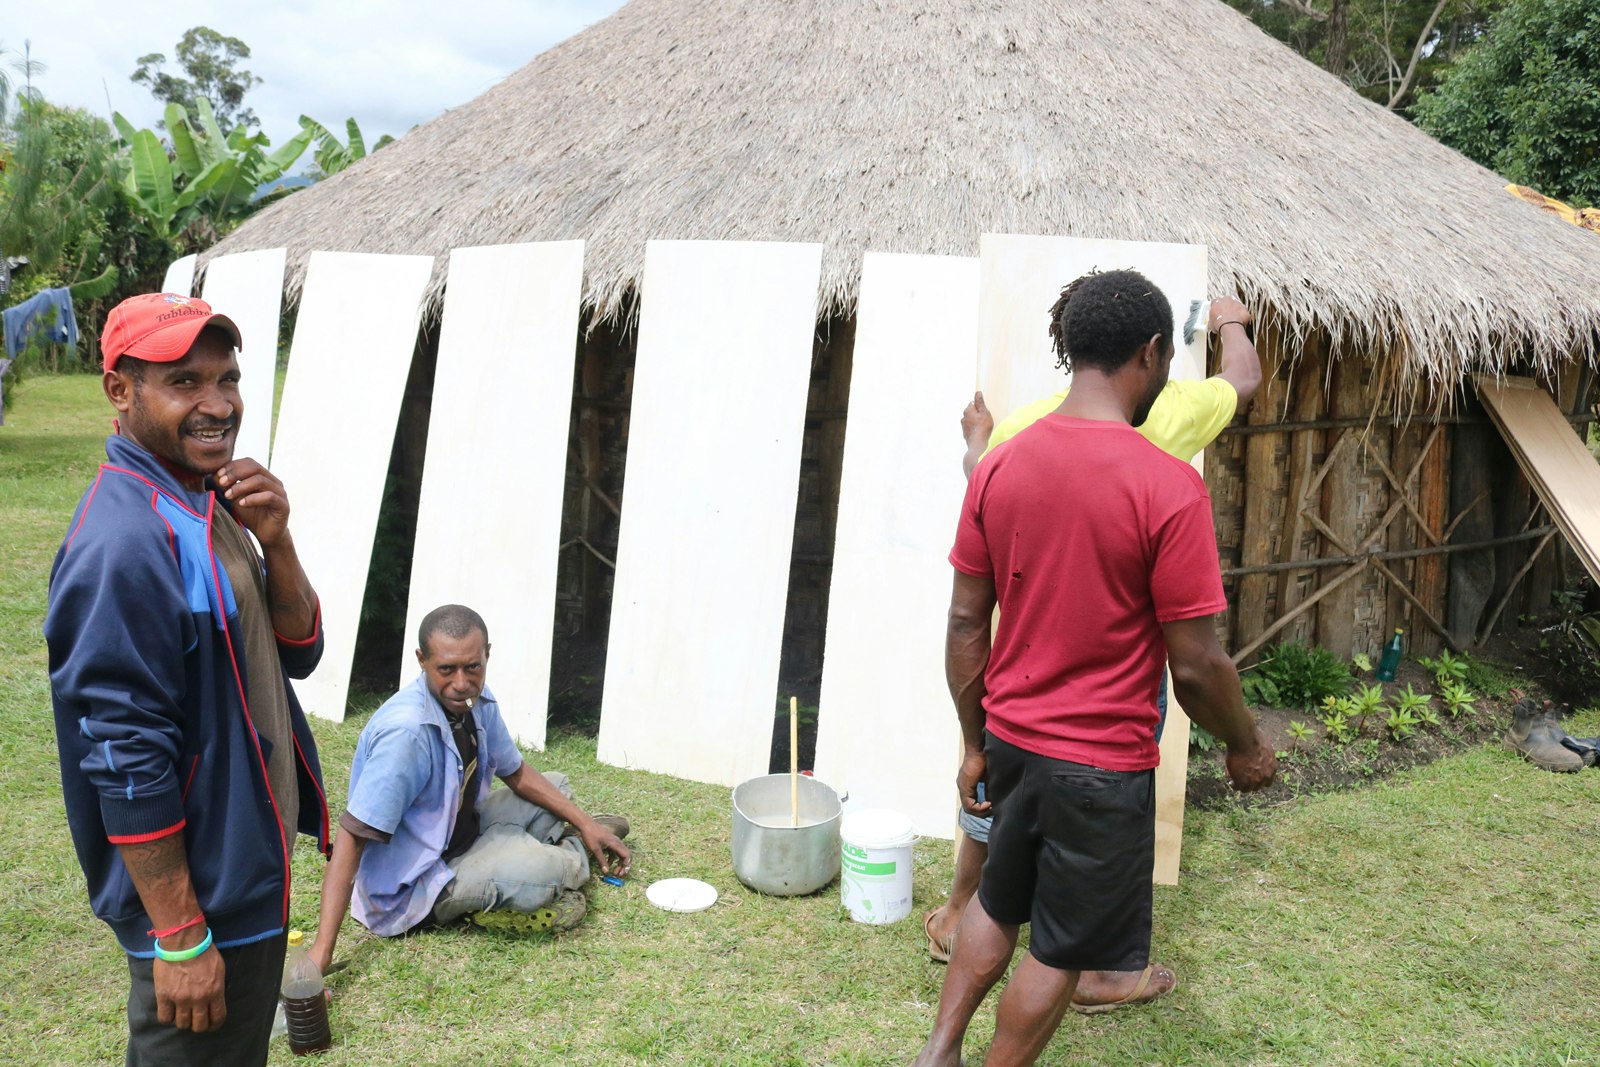 Four Pasifika men working on white plywood sheets stacked against the exterior of a grass hut. The man on the left is smiling with his hand at his chin, mid-speech.